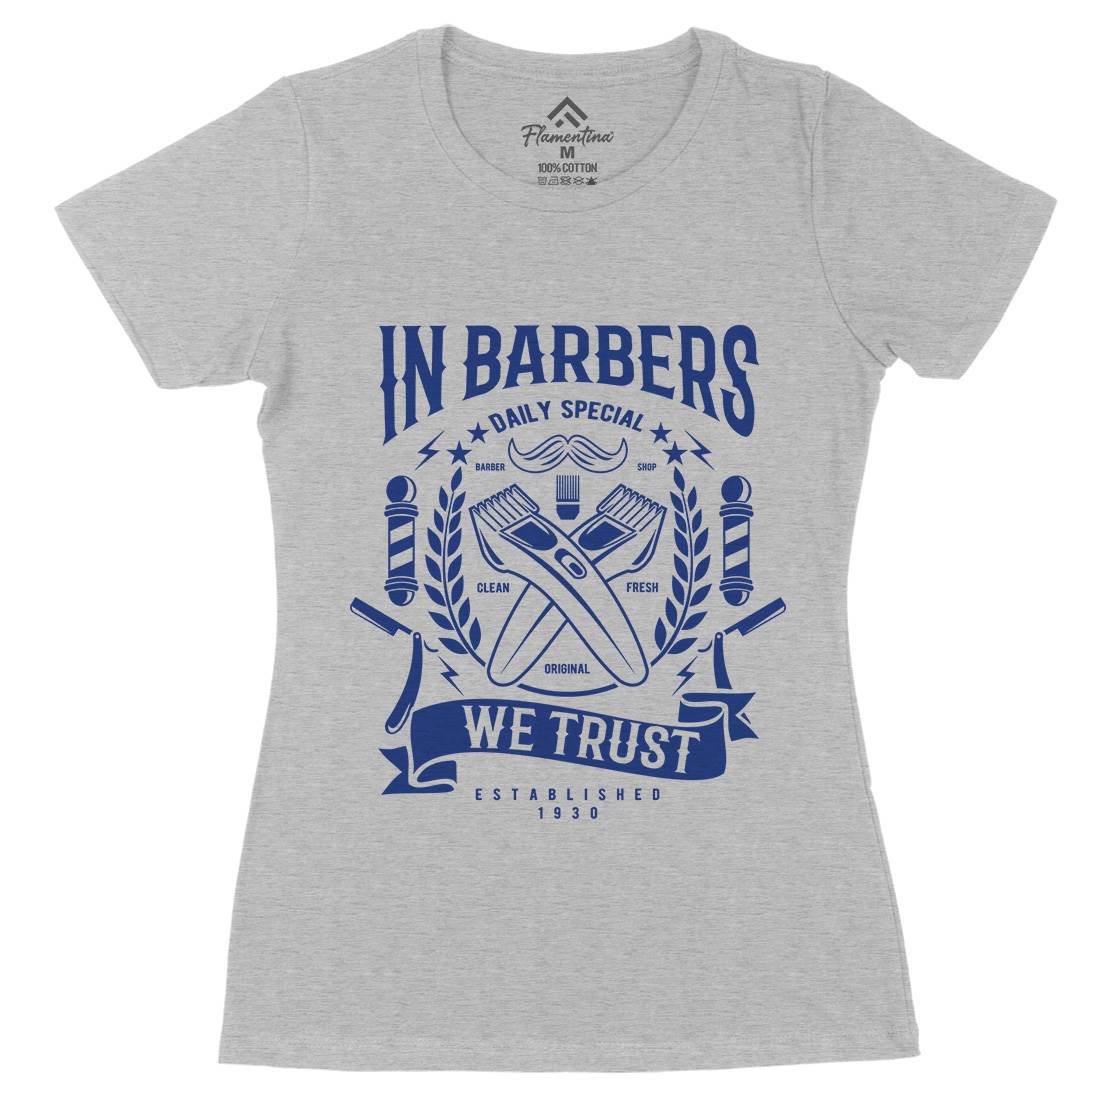 In Barbers We Trust Womens Organic Crew Neck T-Shirt Barber A070